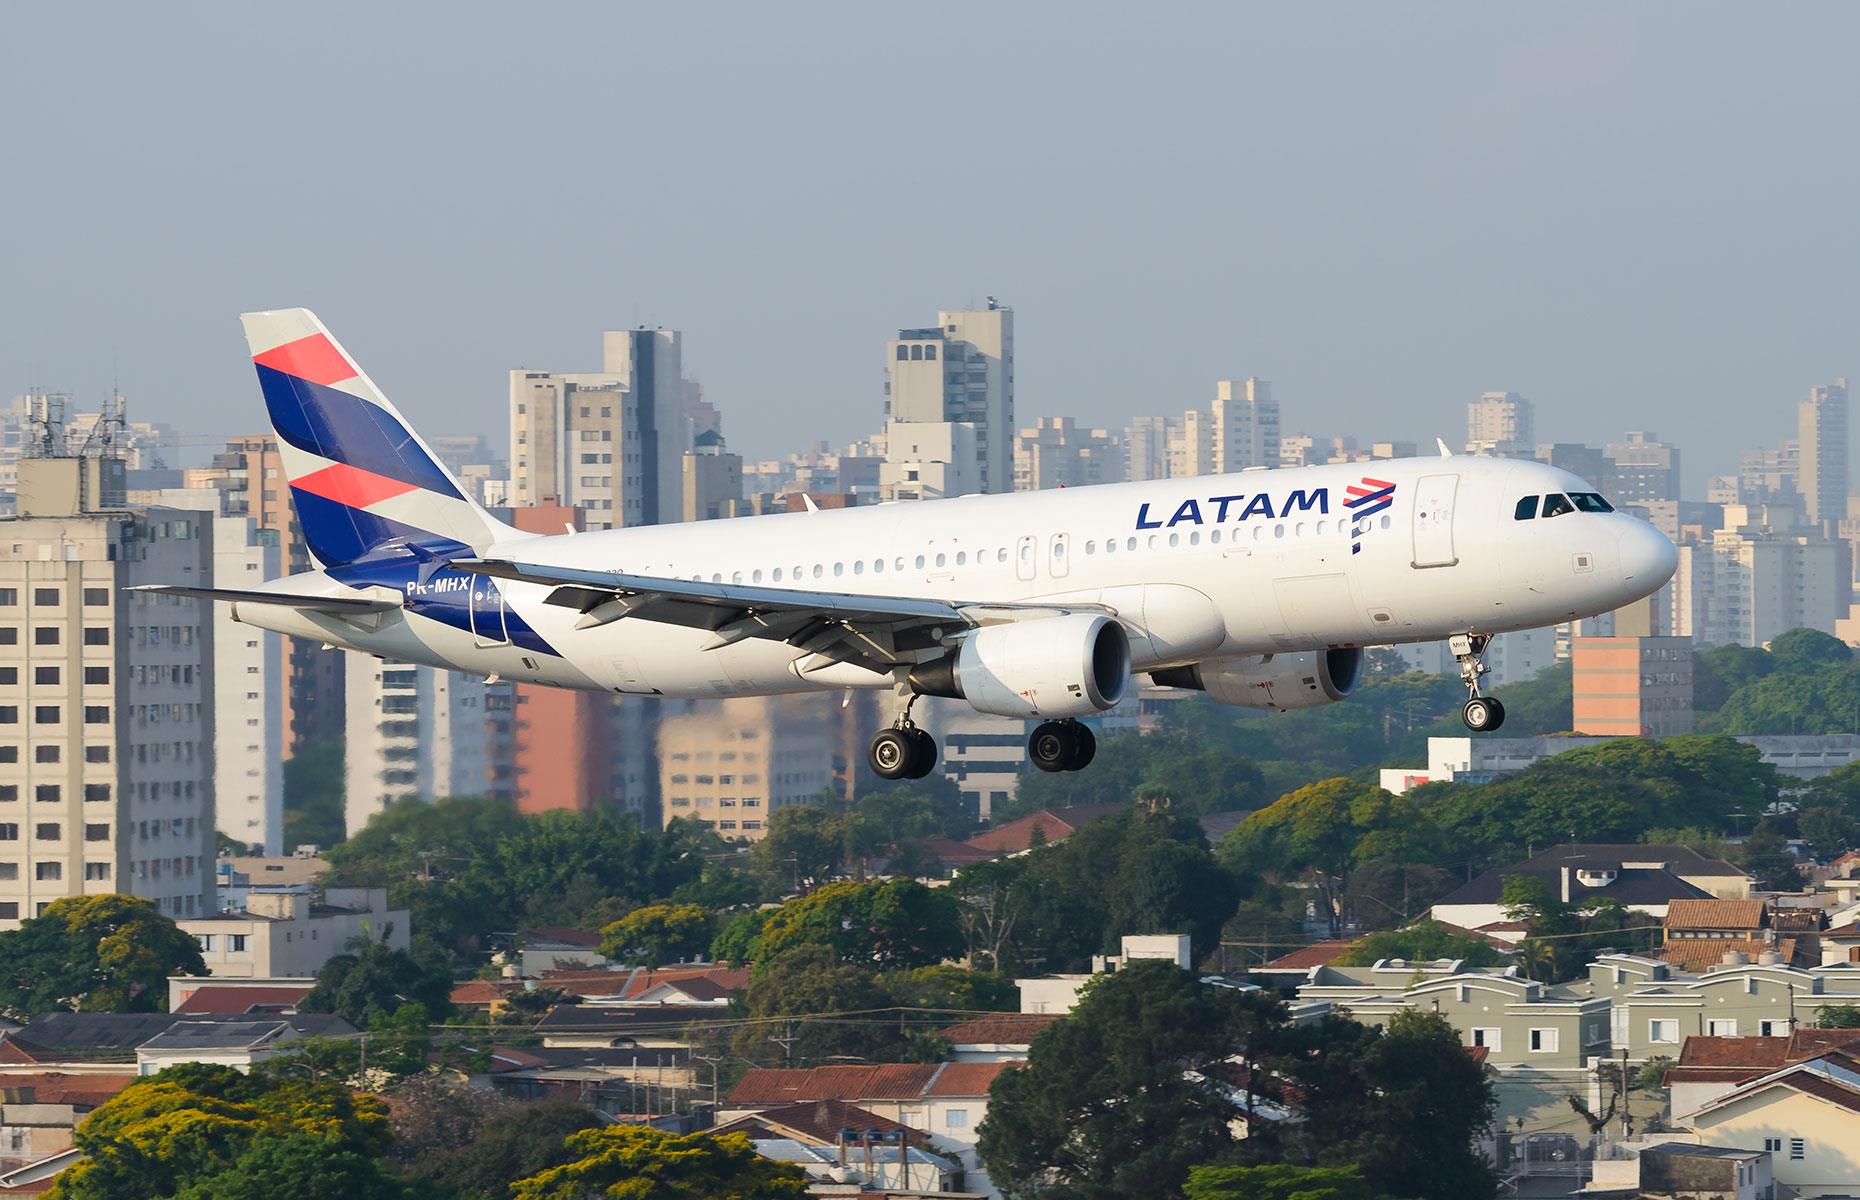 <p>The largest airline in Latin America, LATAM won big across Skytrax's South America categories in 2023, taking gold for both Best Airline and Best Airline Staff Service on the continent. The airline serves Argentina, Brazil, Bolivia, Chile, Colombia, Ecuador, Paraguay, Peru and Uruguay.</p>